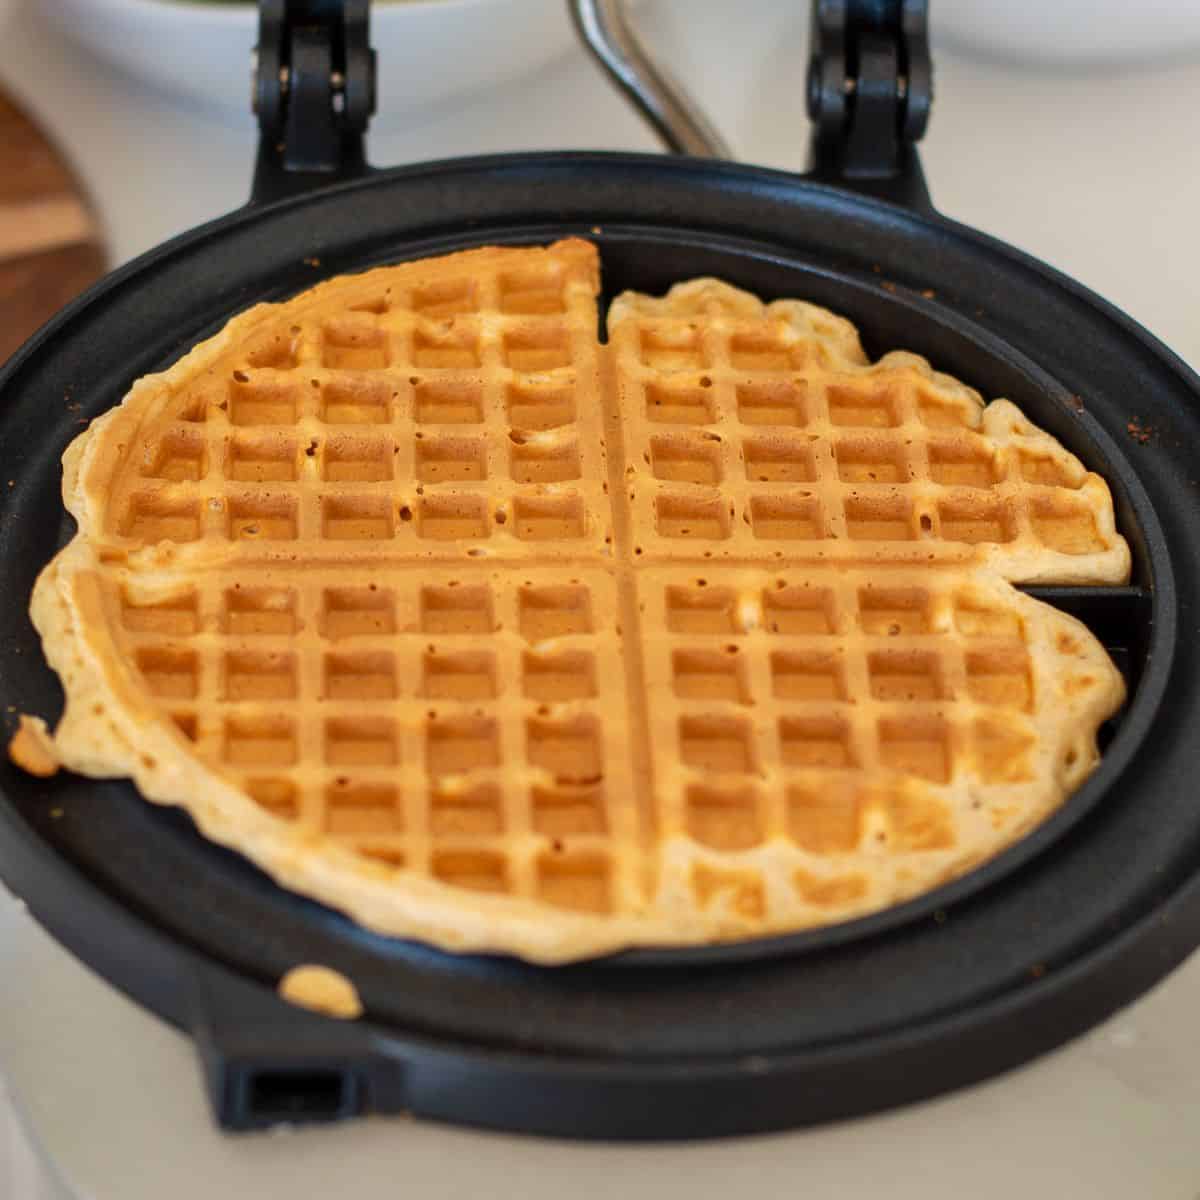 Cooked waffles in a waffle iron.